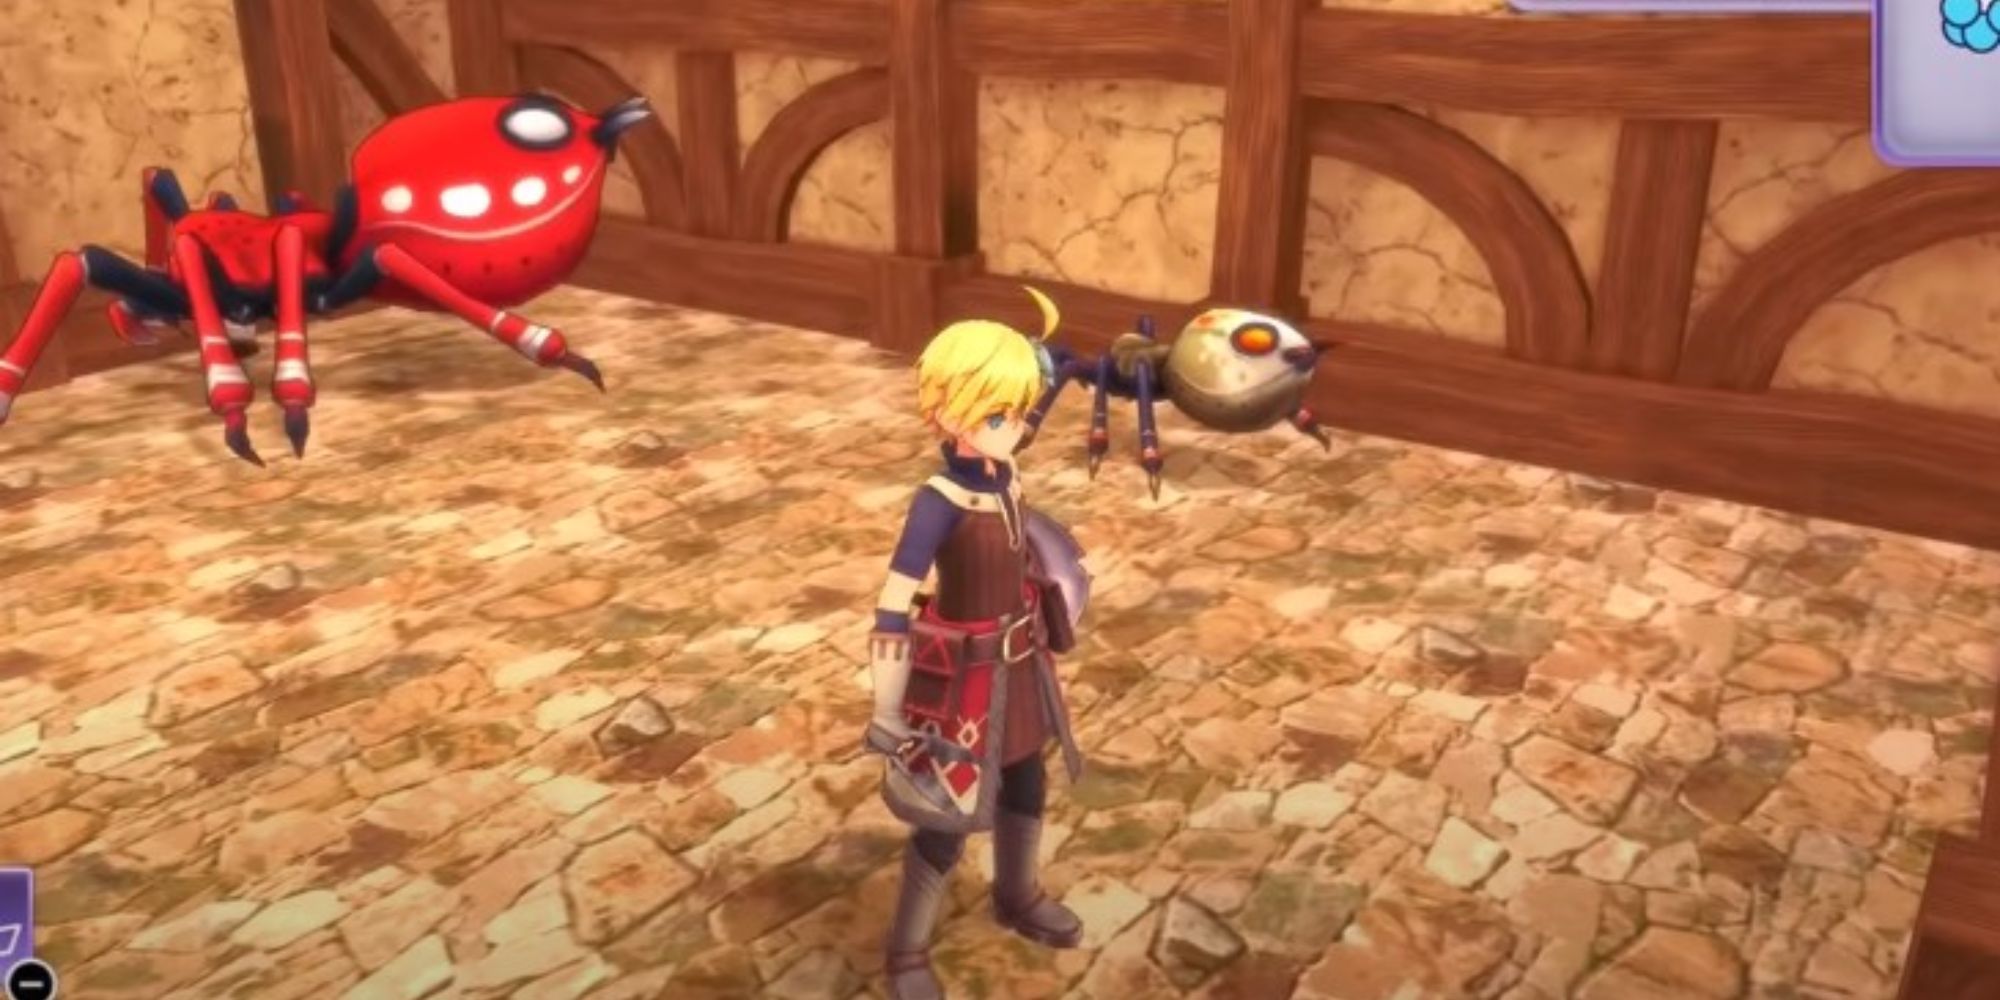 The player standing in the barn with two monster Spiders behind him in Rune Factory 5